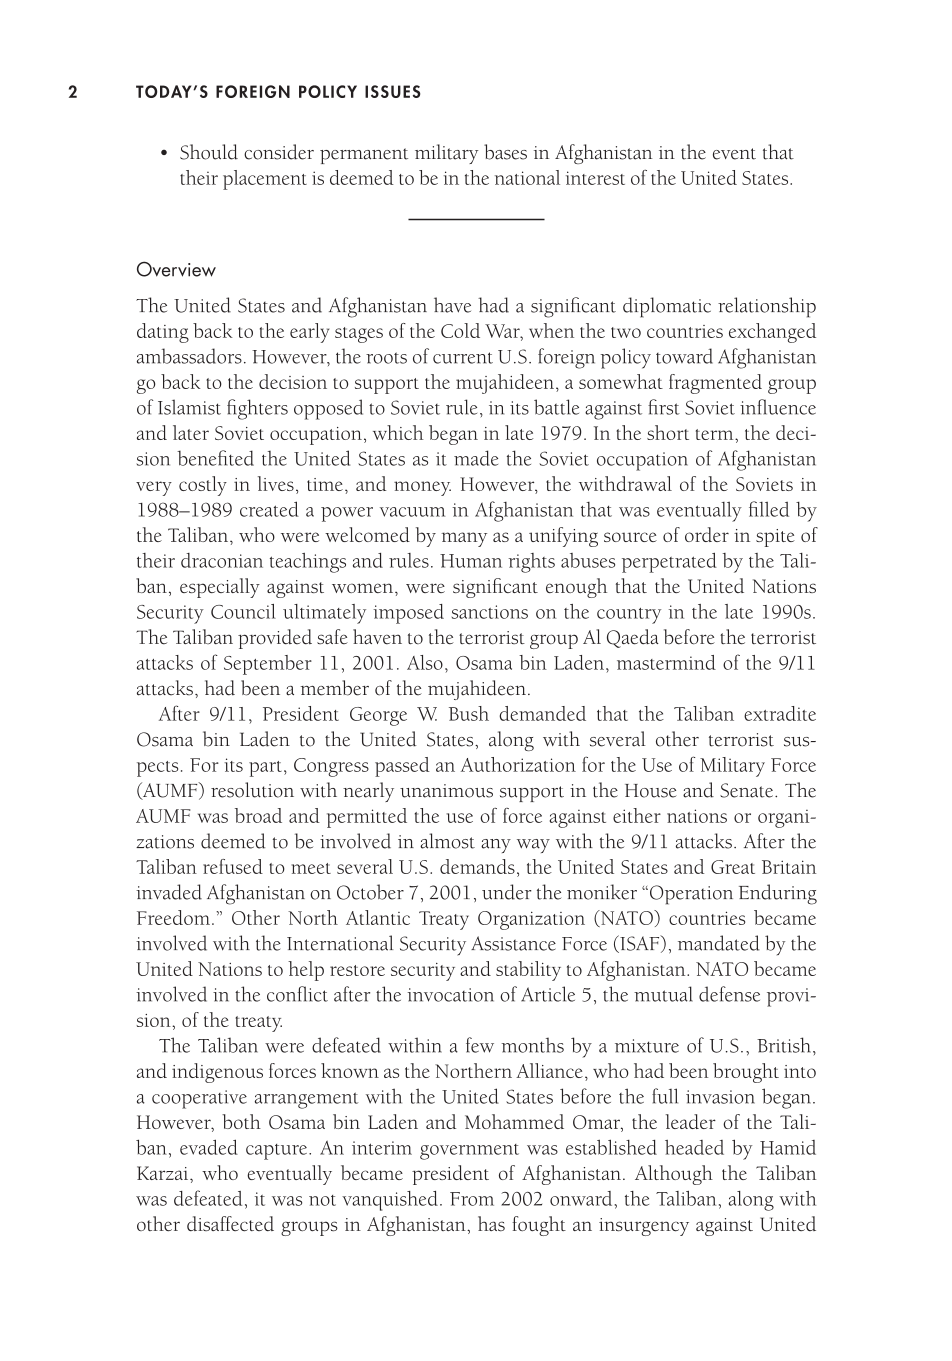 Today's Foreign Policy Issues: Democrats and Republicans page 2